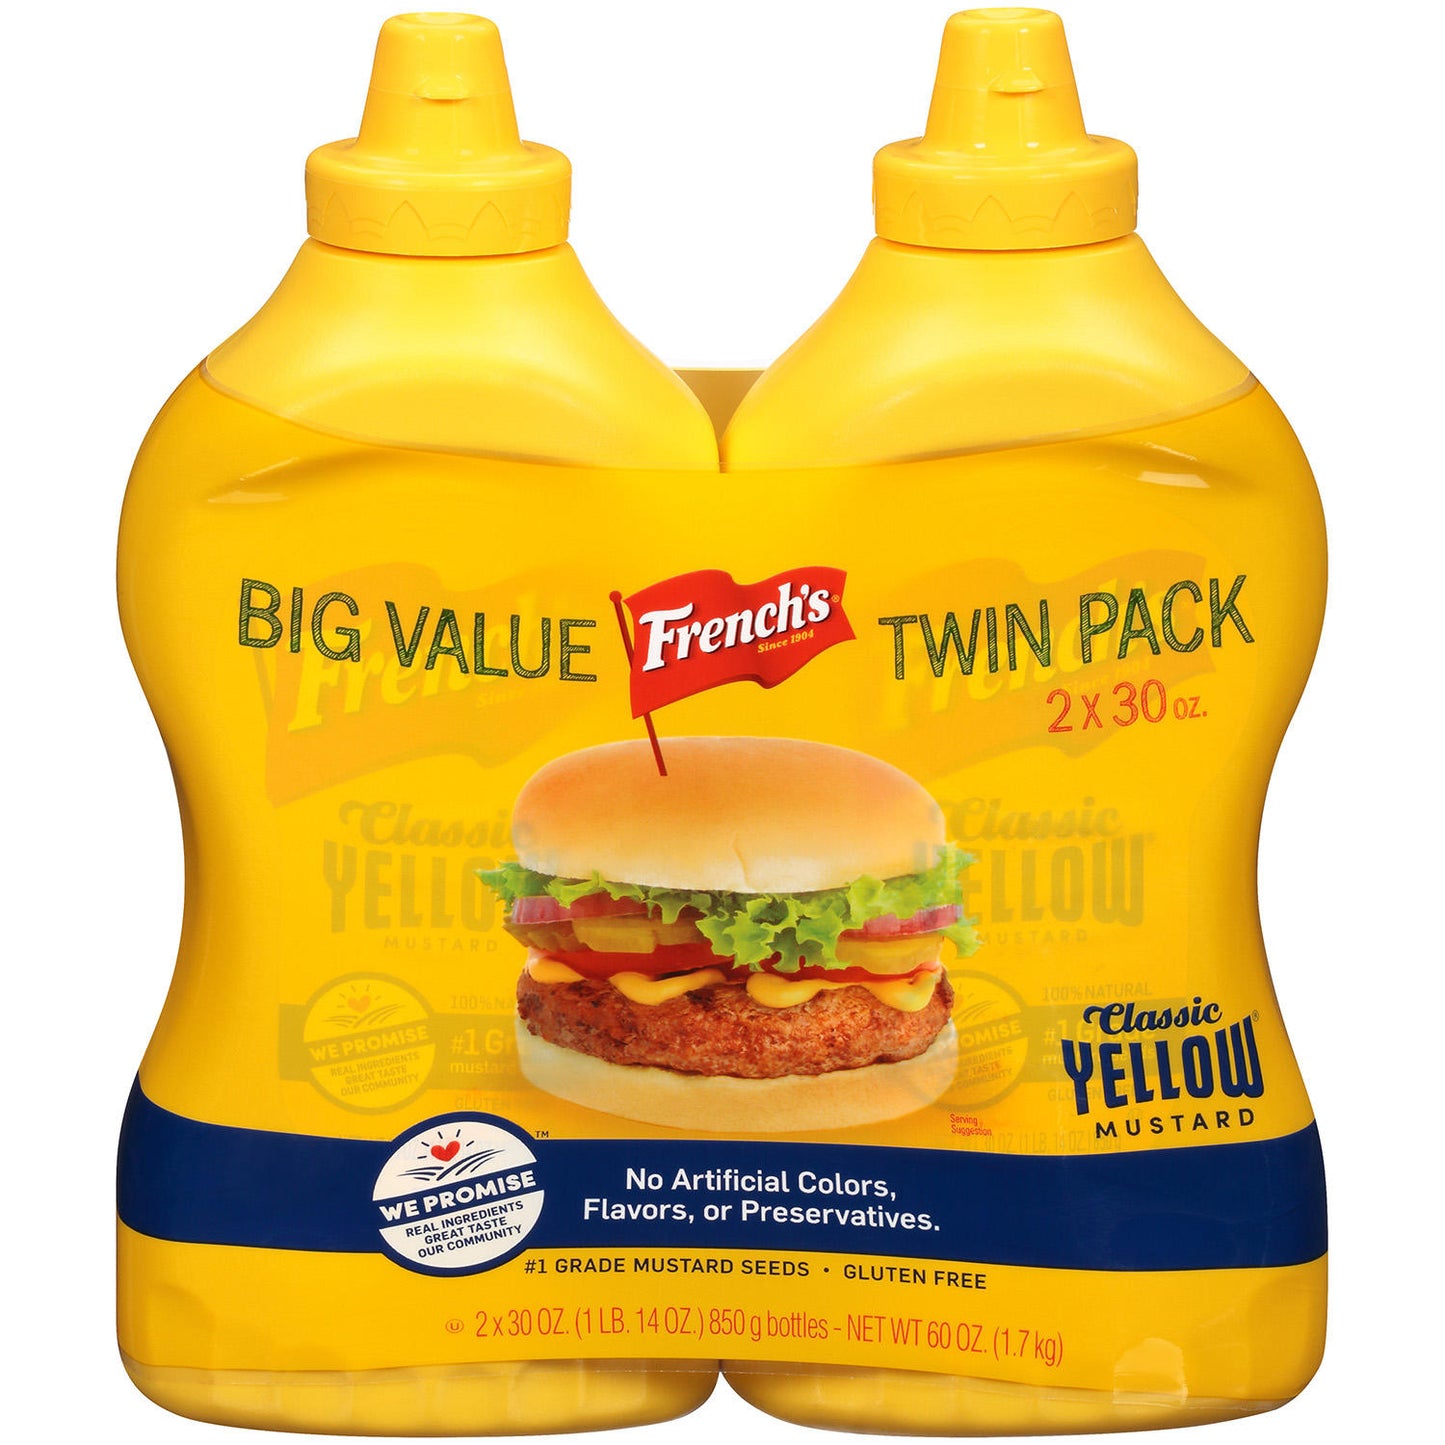 French's 100% Natural Classic Yellow Mustard (30 oz., 2 pk.)